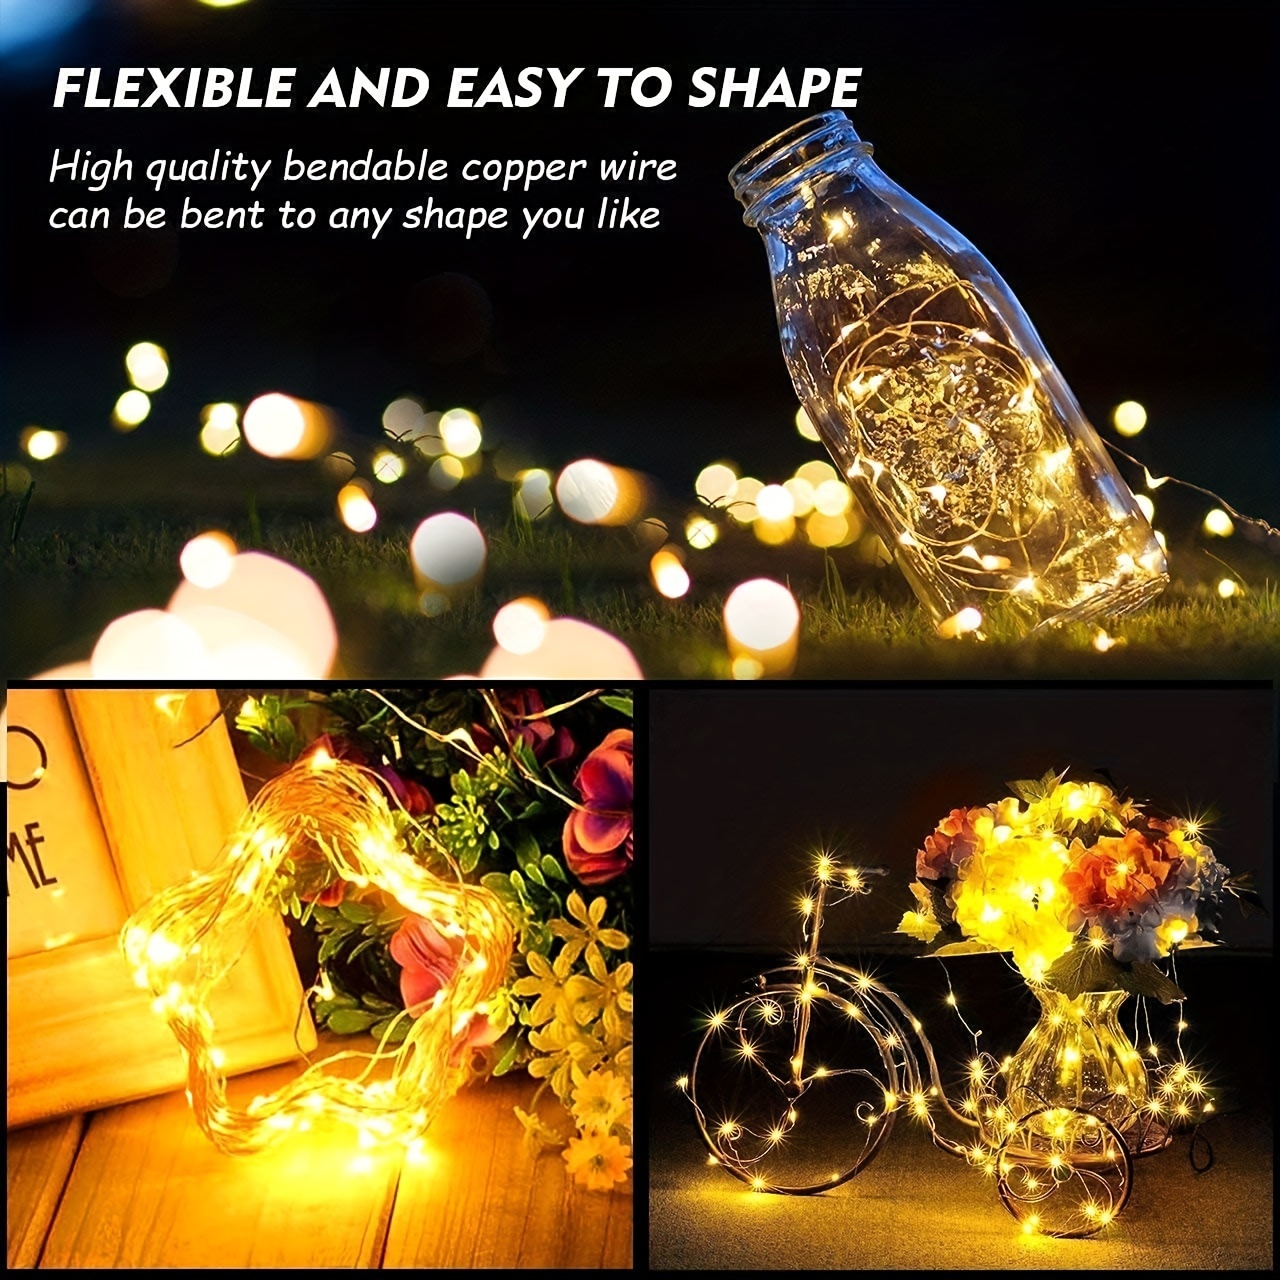 gifts, led string light 33 6633ft fairy lights usb powered warm white multicolored 100 200 leds ipx6 waterproof perfect for outdoor indoor christmas xmas tree thanksgiving day gifts garden winter decor parties weddings festivals bedroom and table decoration details 1